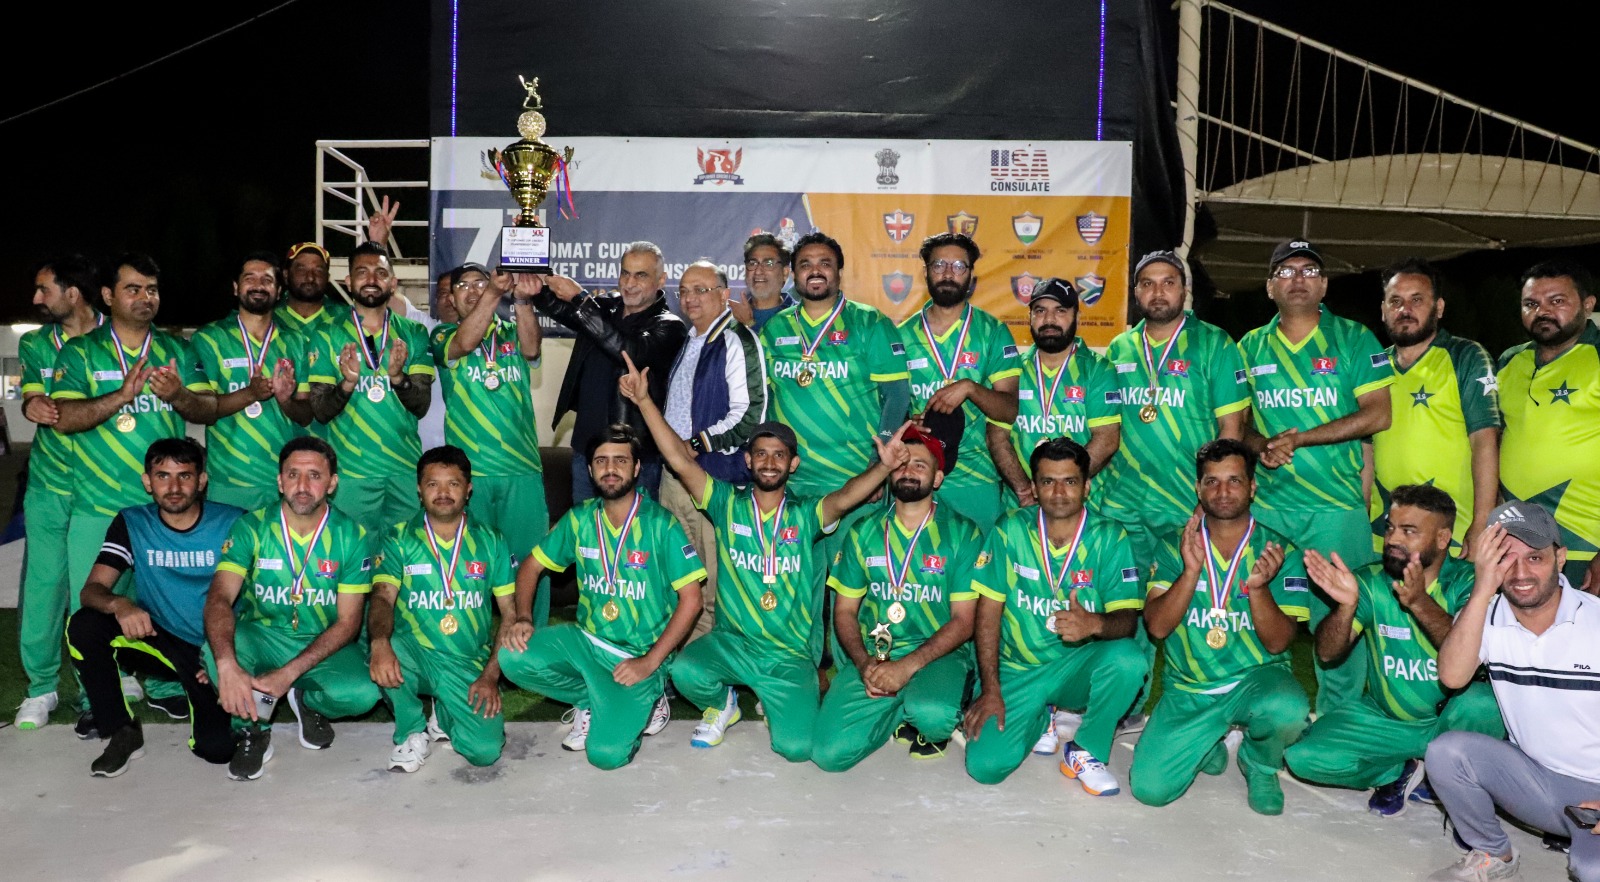 Skyline University's 7th Diplomatic Cricket Championship concludes with Pakisthan Consulate's Victory